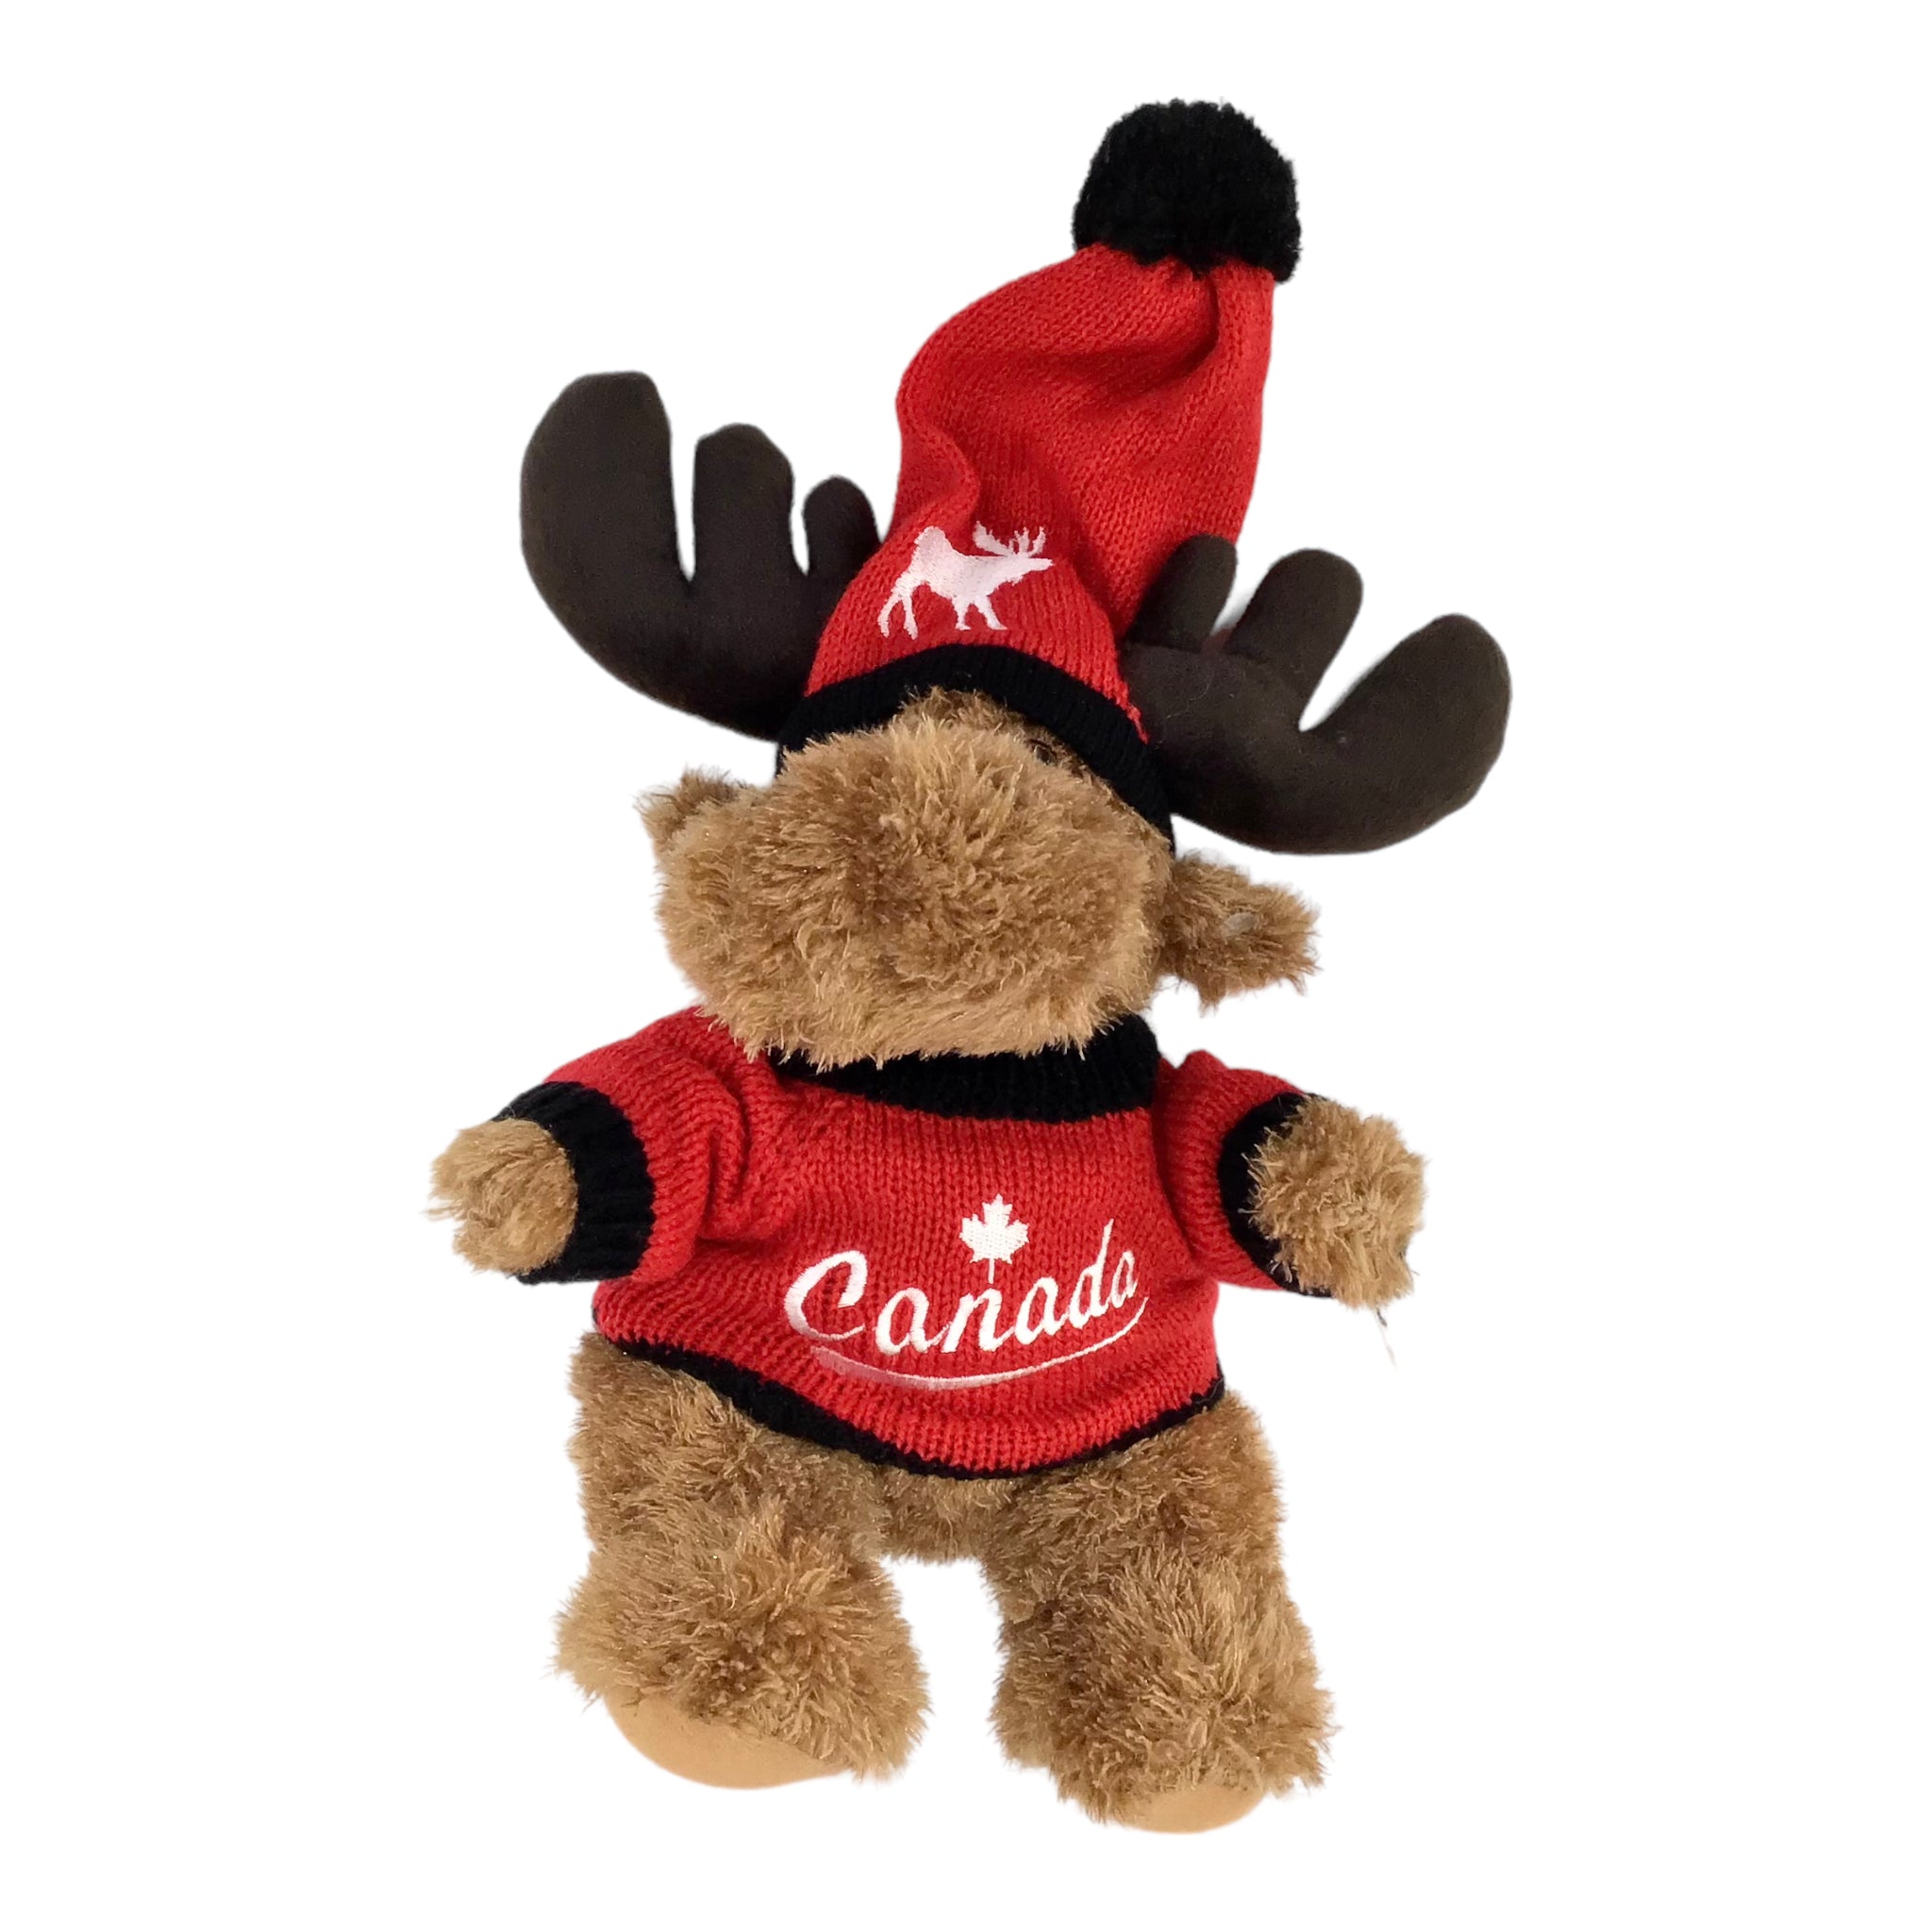 Canada Moose Plush Toy | Canada Moose with Maple Leaf Sweater and Hat 10”| Moose Stuffed Plush Toy | Soft Cuddly Stuffed Moose for Baby, Boys, and Girls (Red and White)